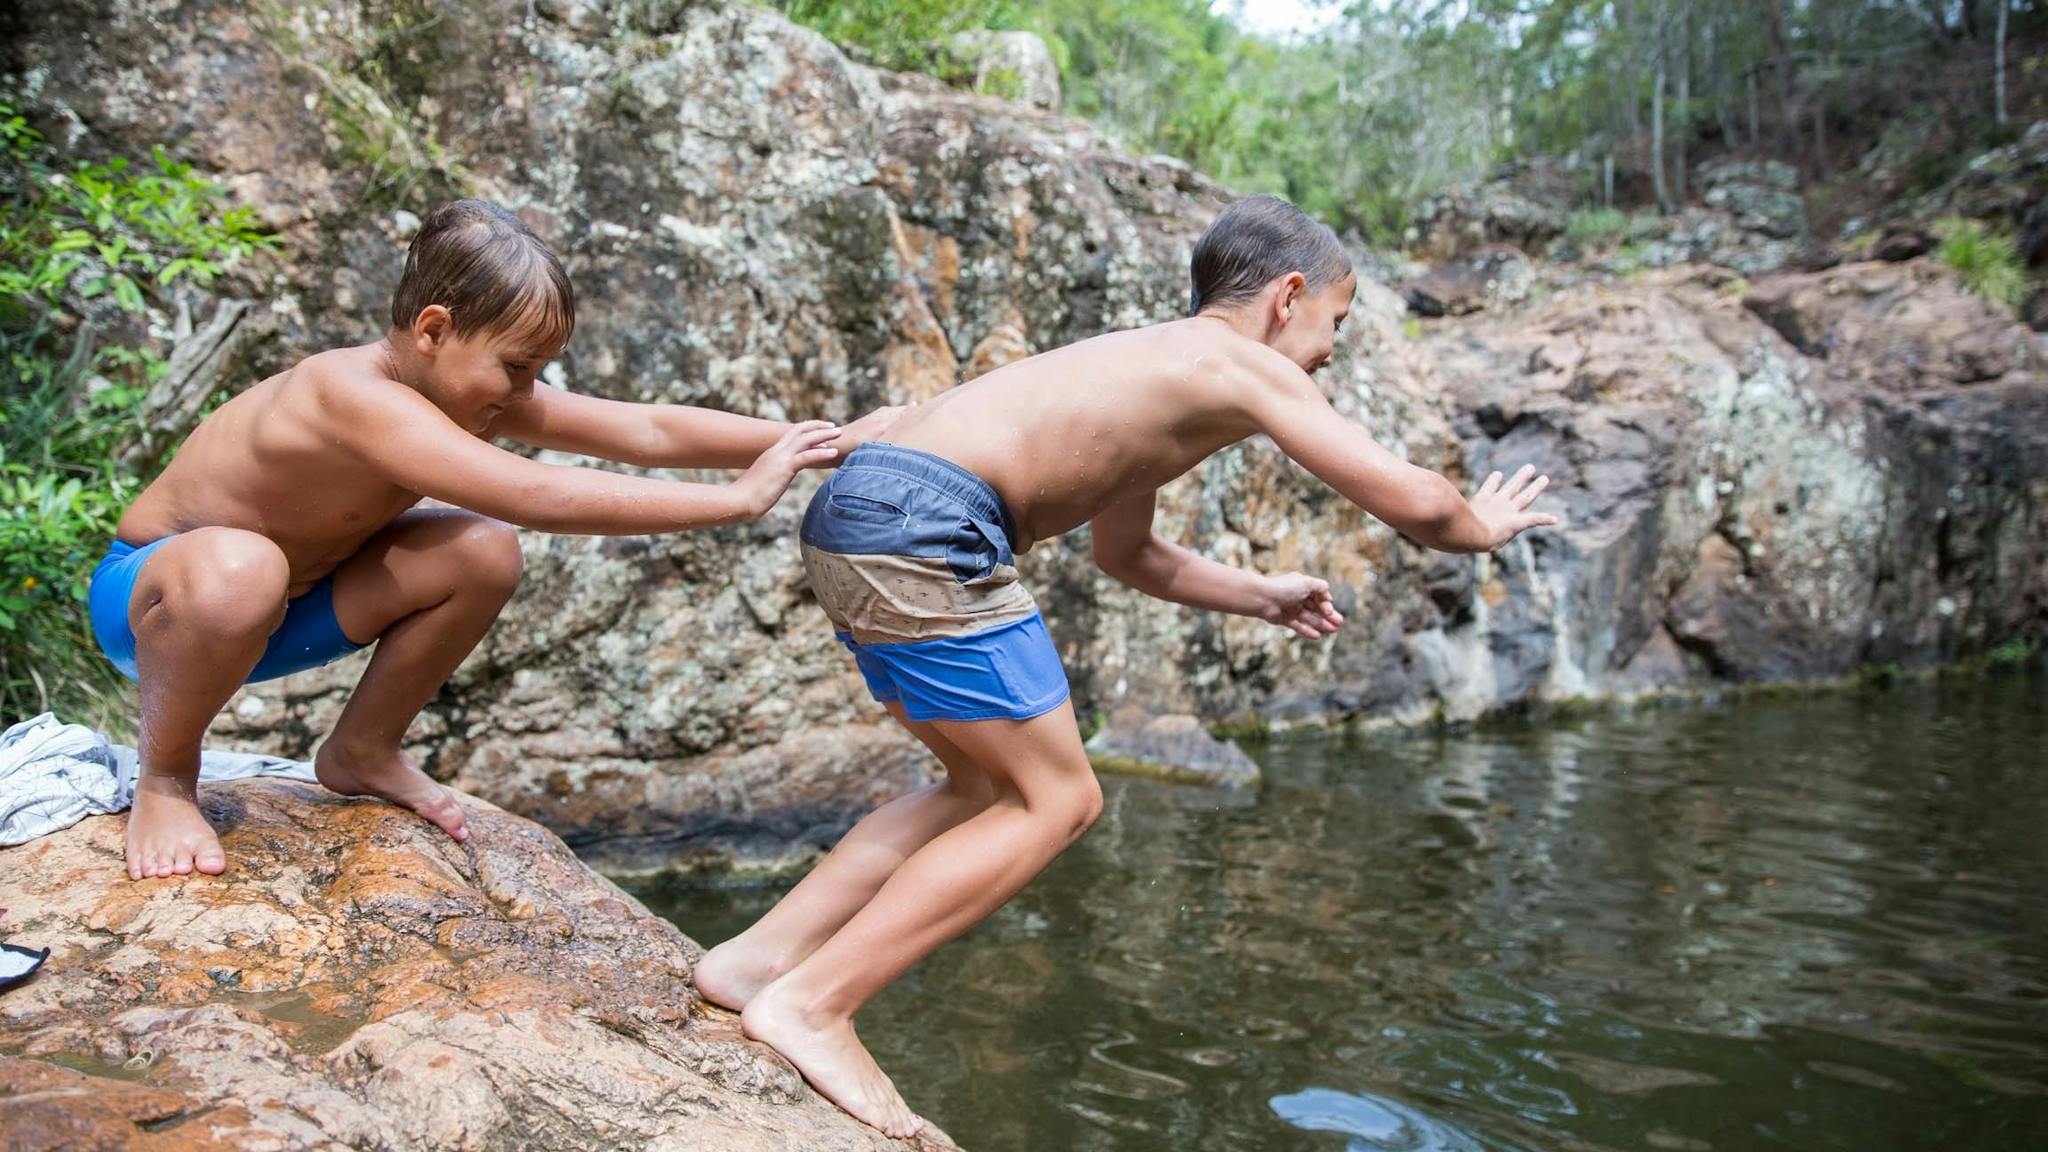 Two young boys jumping into swimming hole off rocks